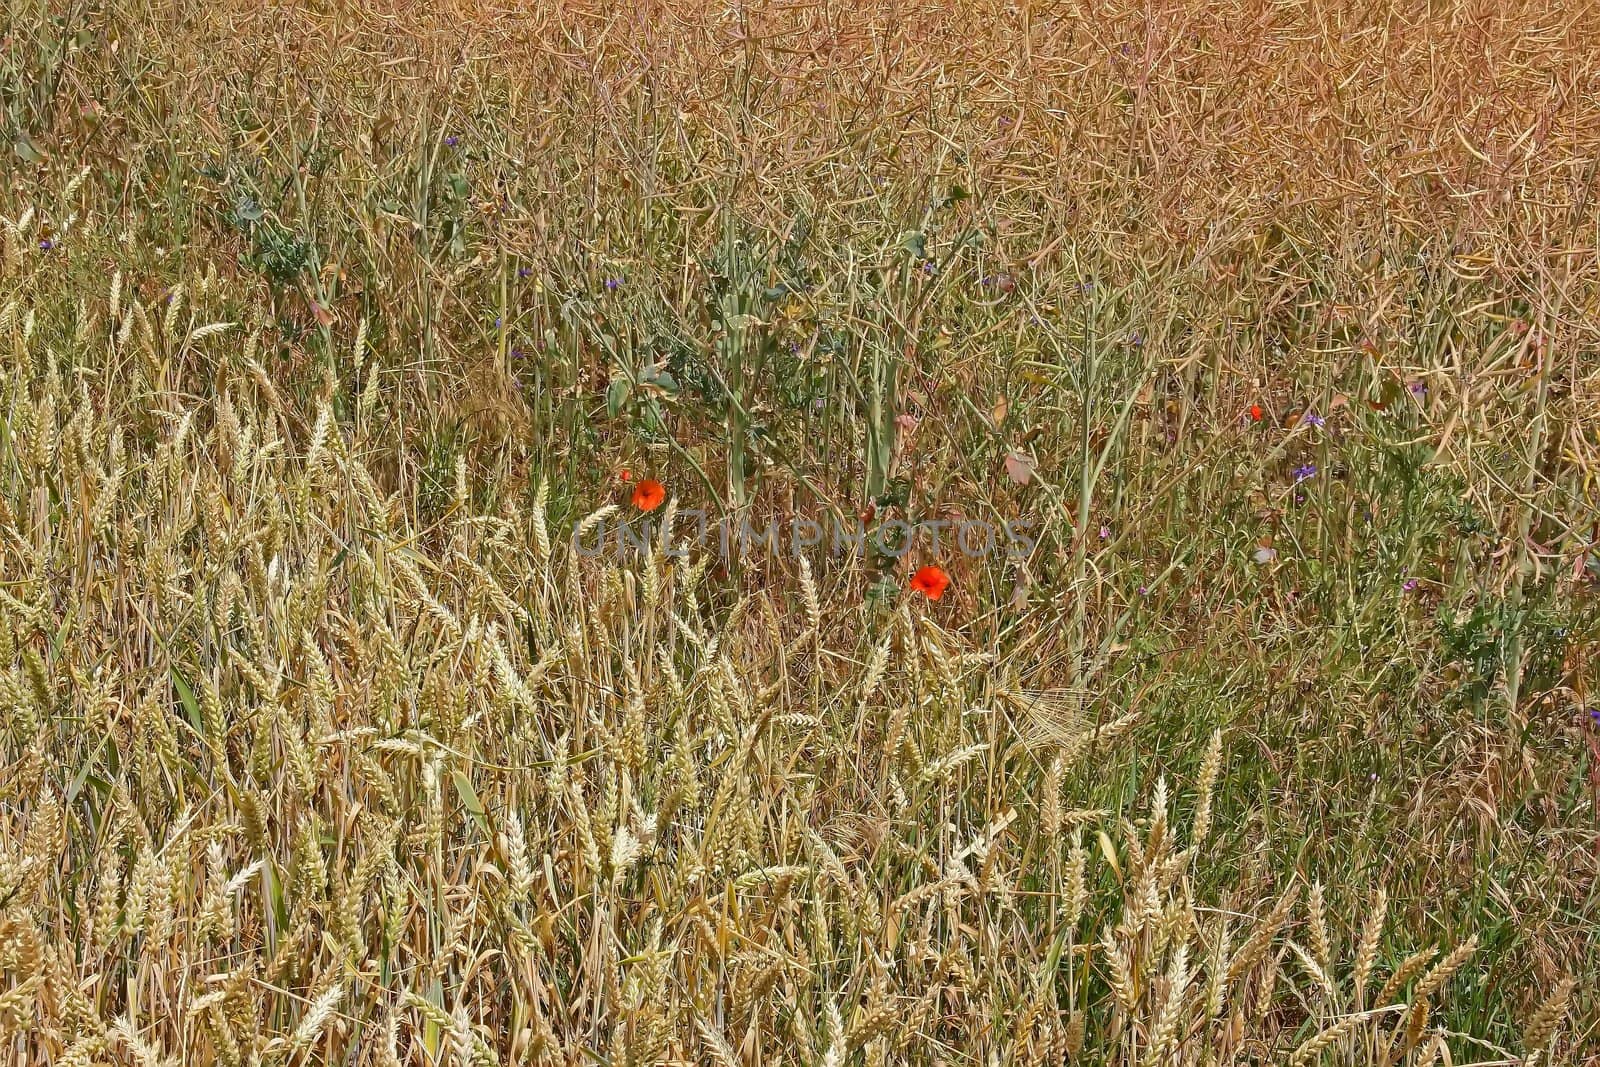 field of wheat and rapeseed separated by two poppies